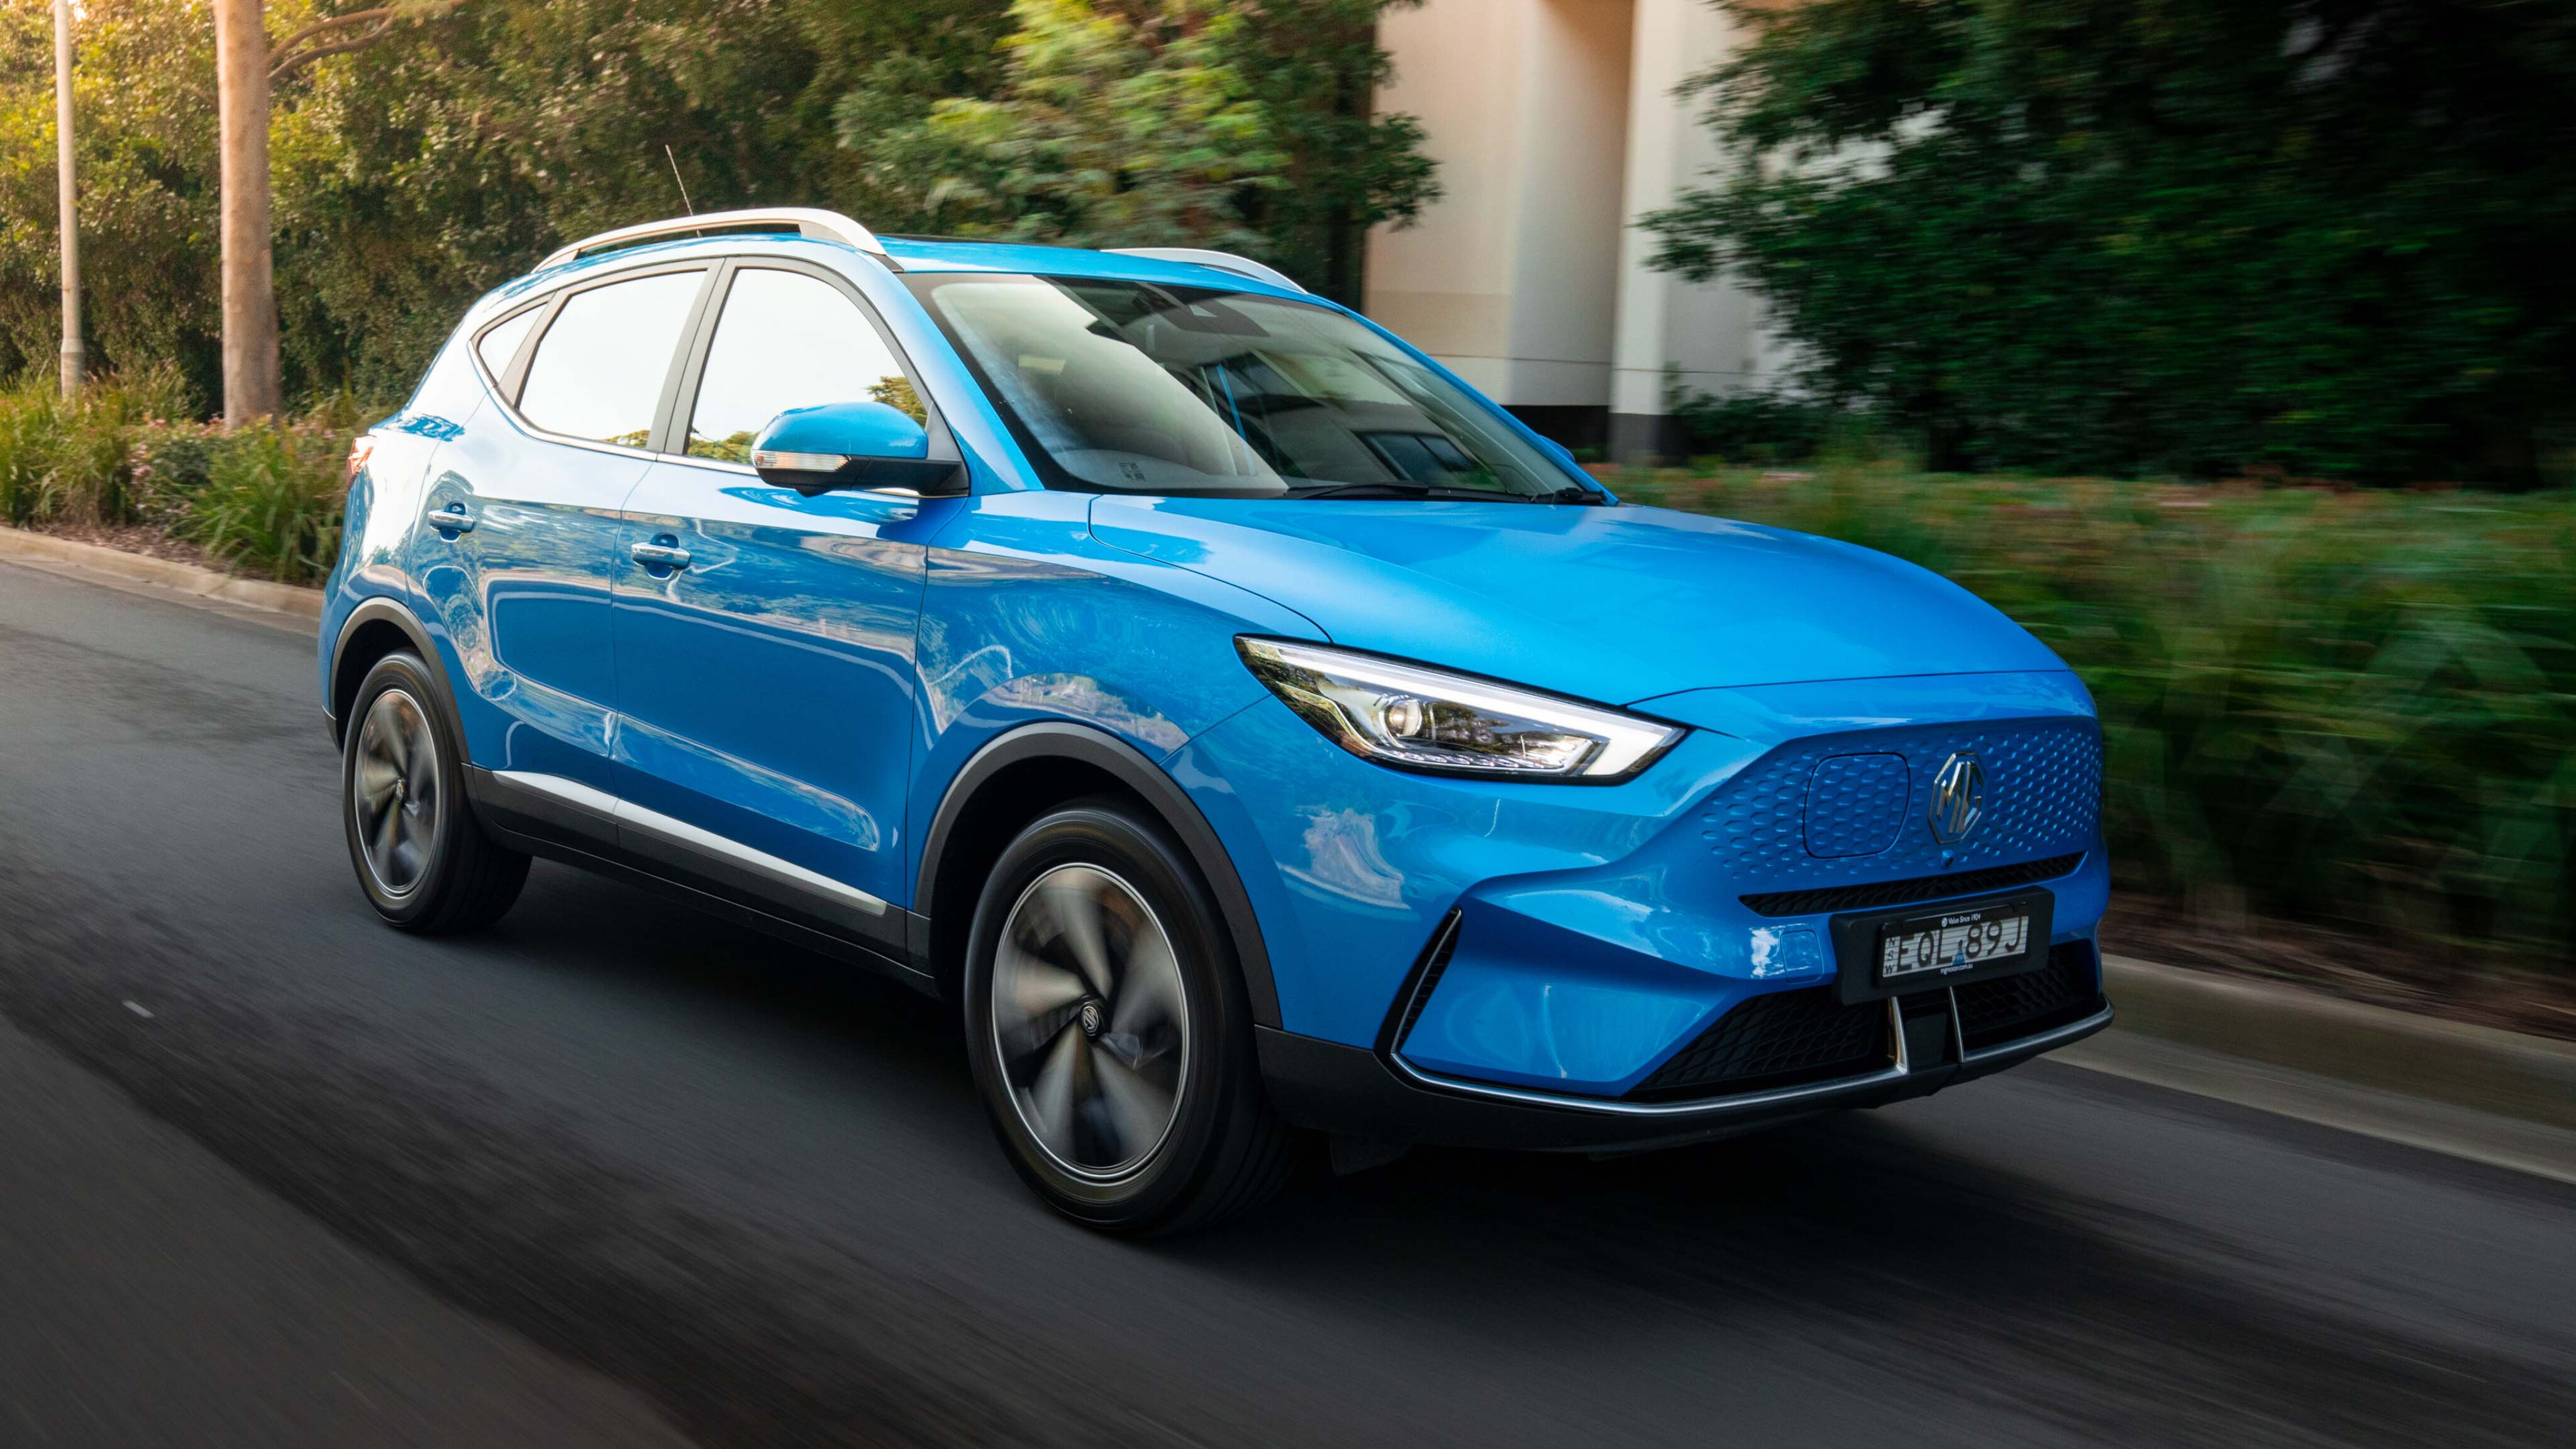 Explore the Latest MG ZS: Review, Interior, Price and More in 2023